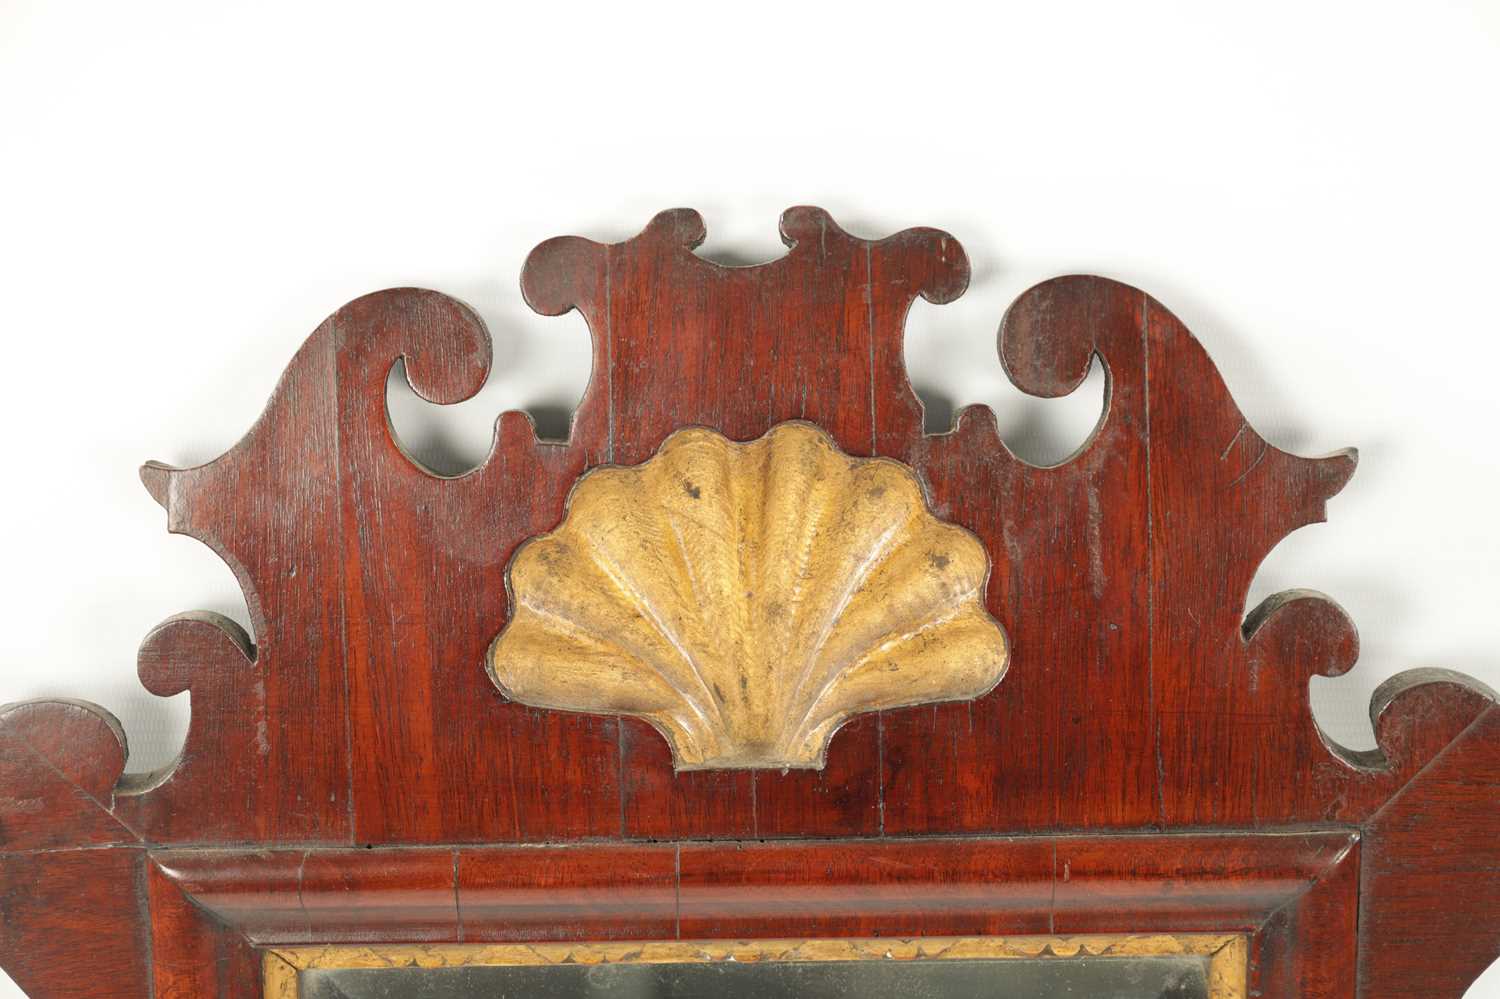 A SMALL 18TH CENTURY WALNUT HANGING MIRROR - Image 2 of 6